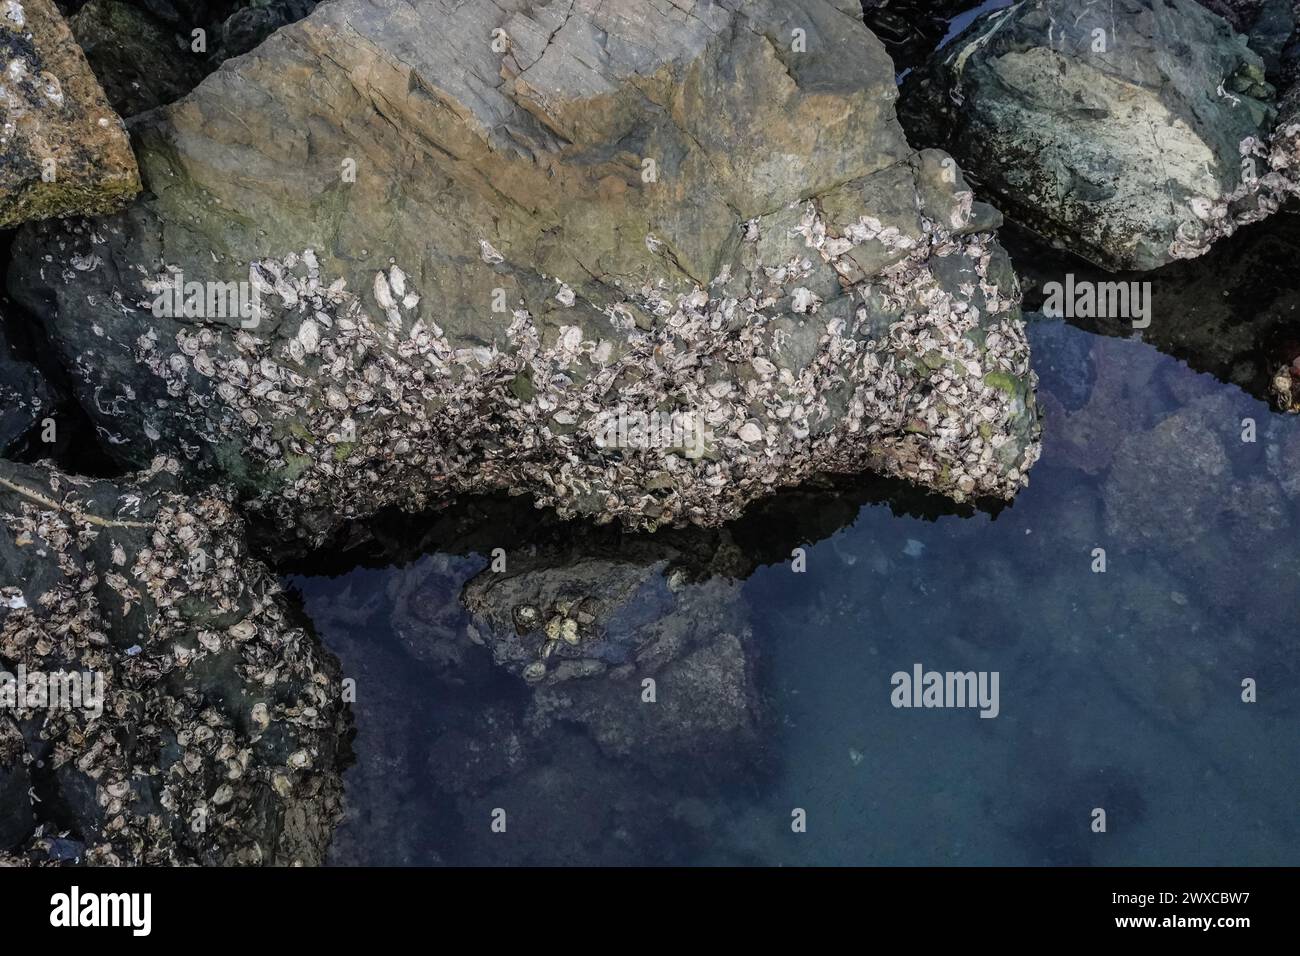 A large rock with oyster shells attached in Australia Stock Photo